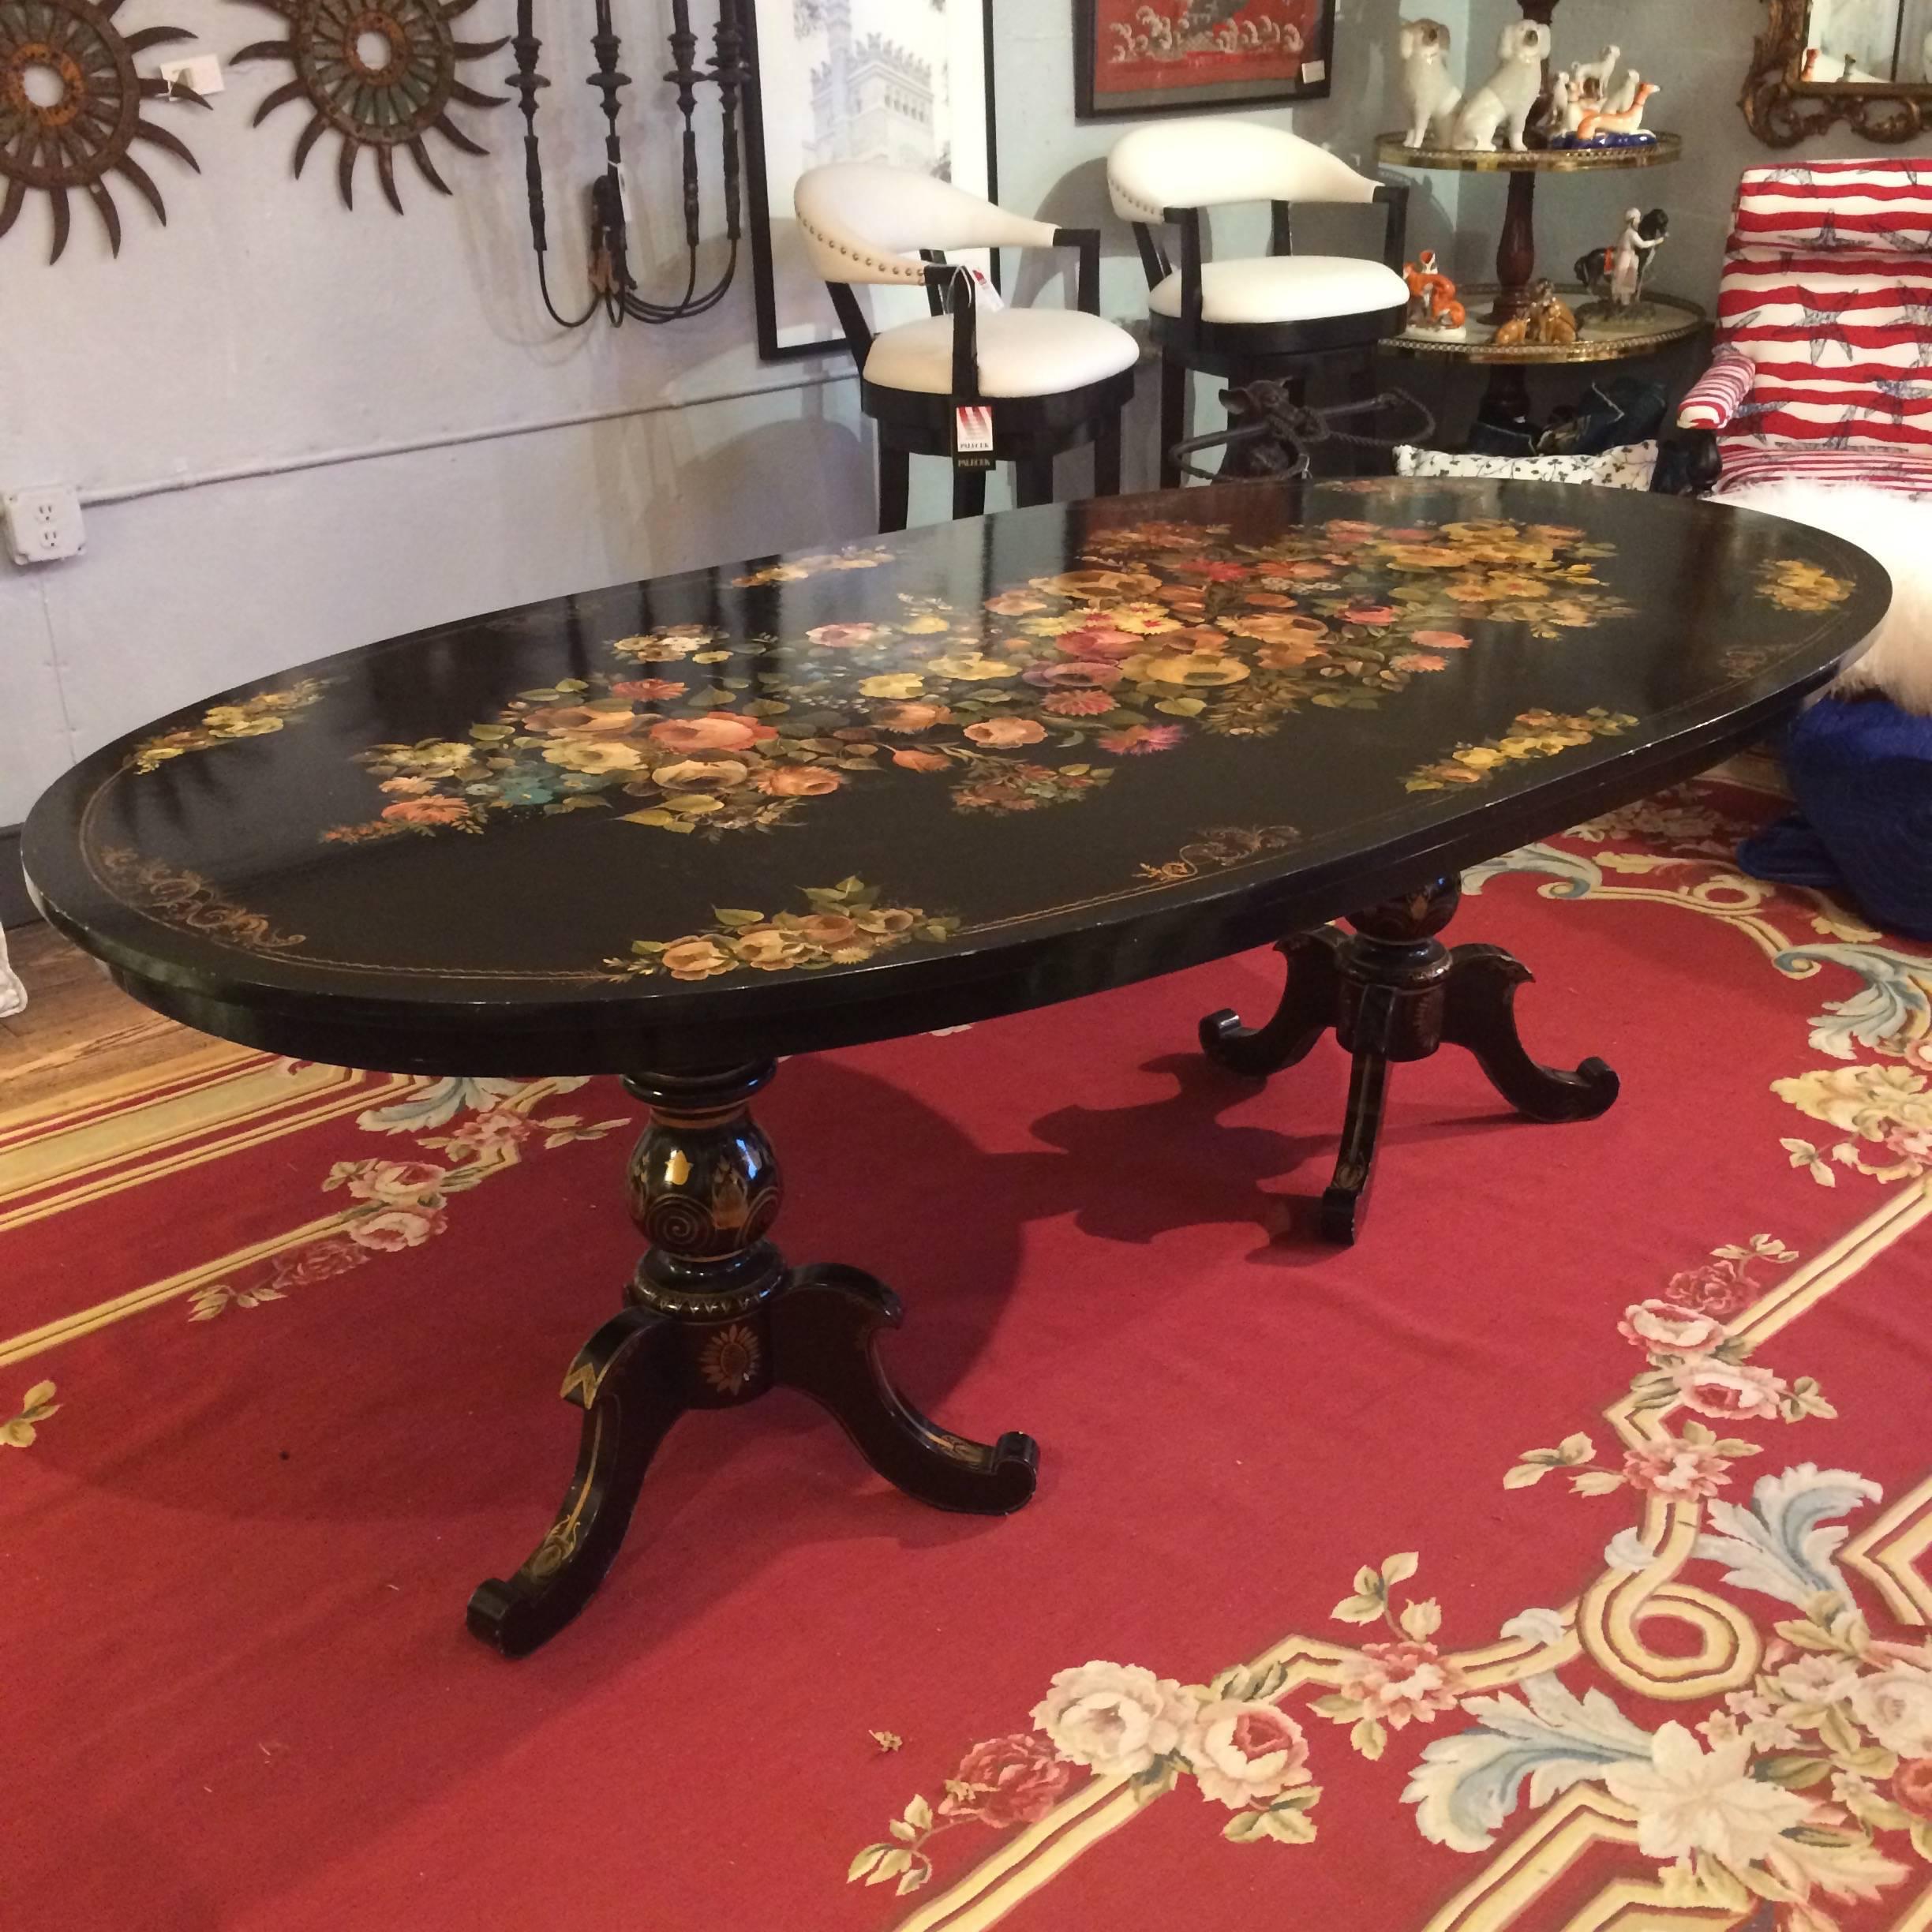 One of a kind charming oval dining table having black background and meticulous hand-painted floral decoration in pinks, green, cream and gold, with two tripod pedestals. Fully restored Victorian dining chairs complete the set, having same color